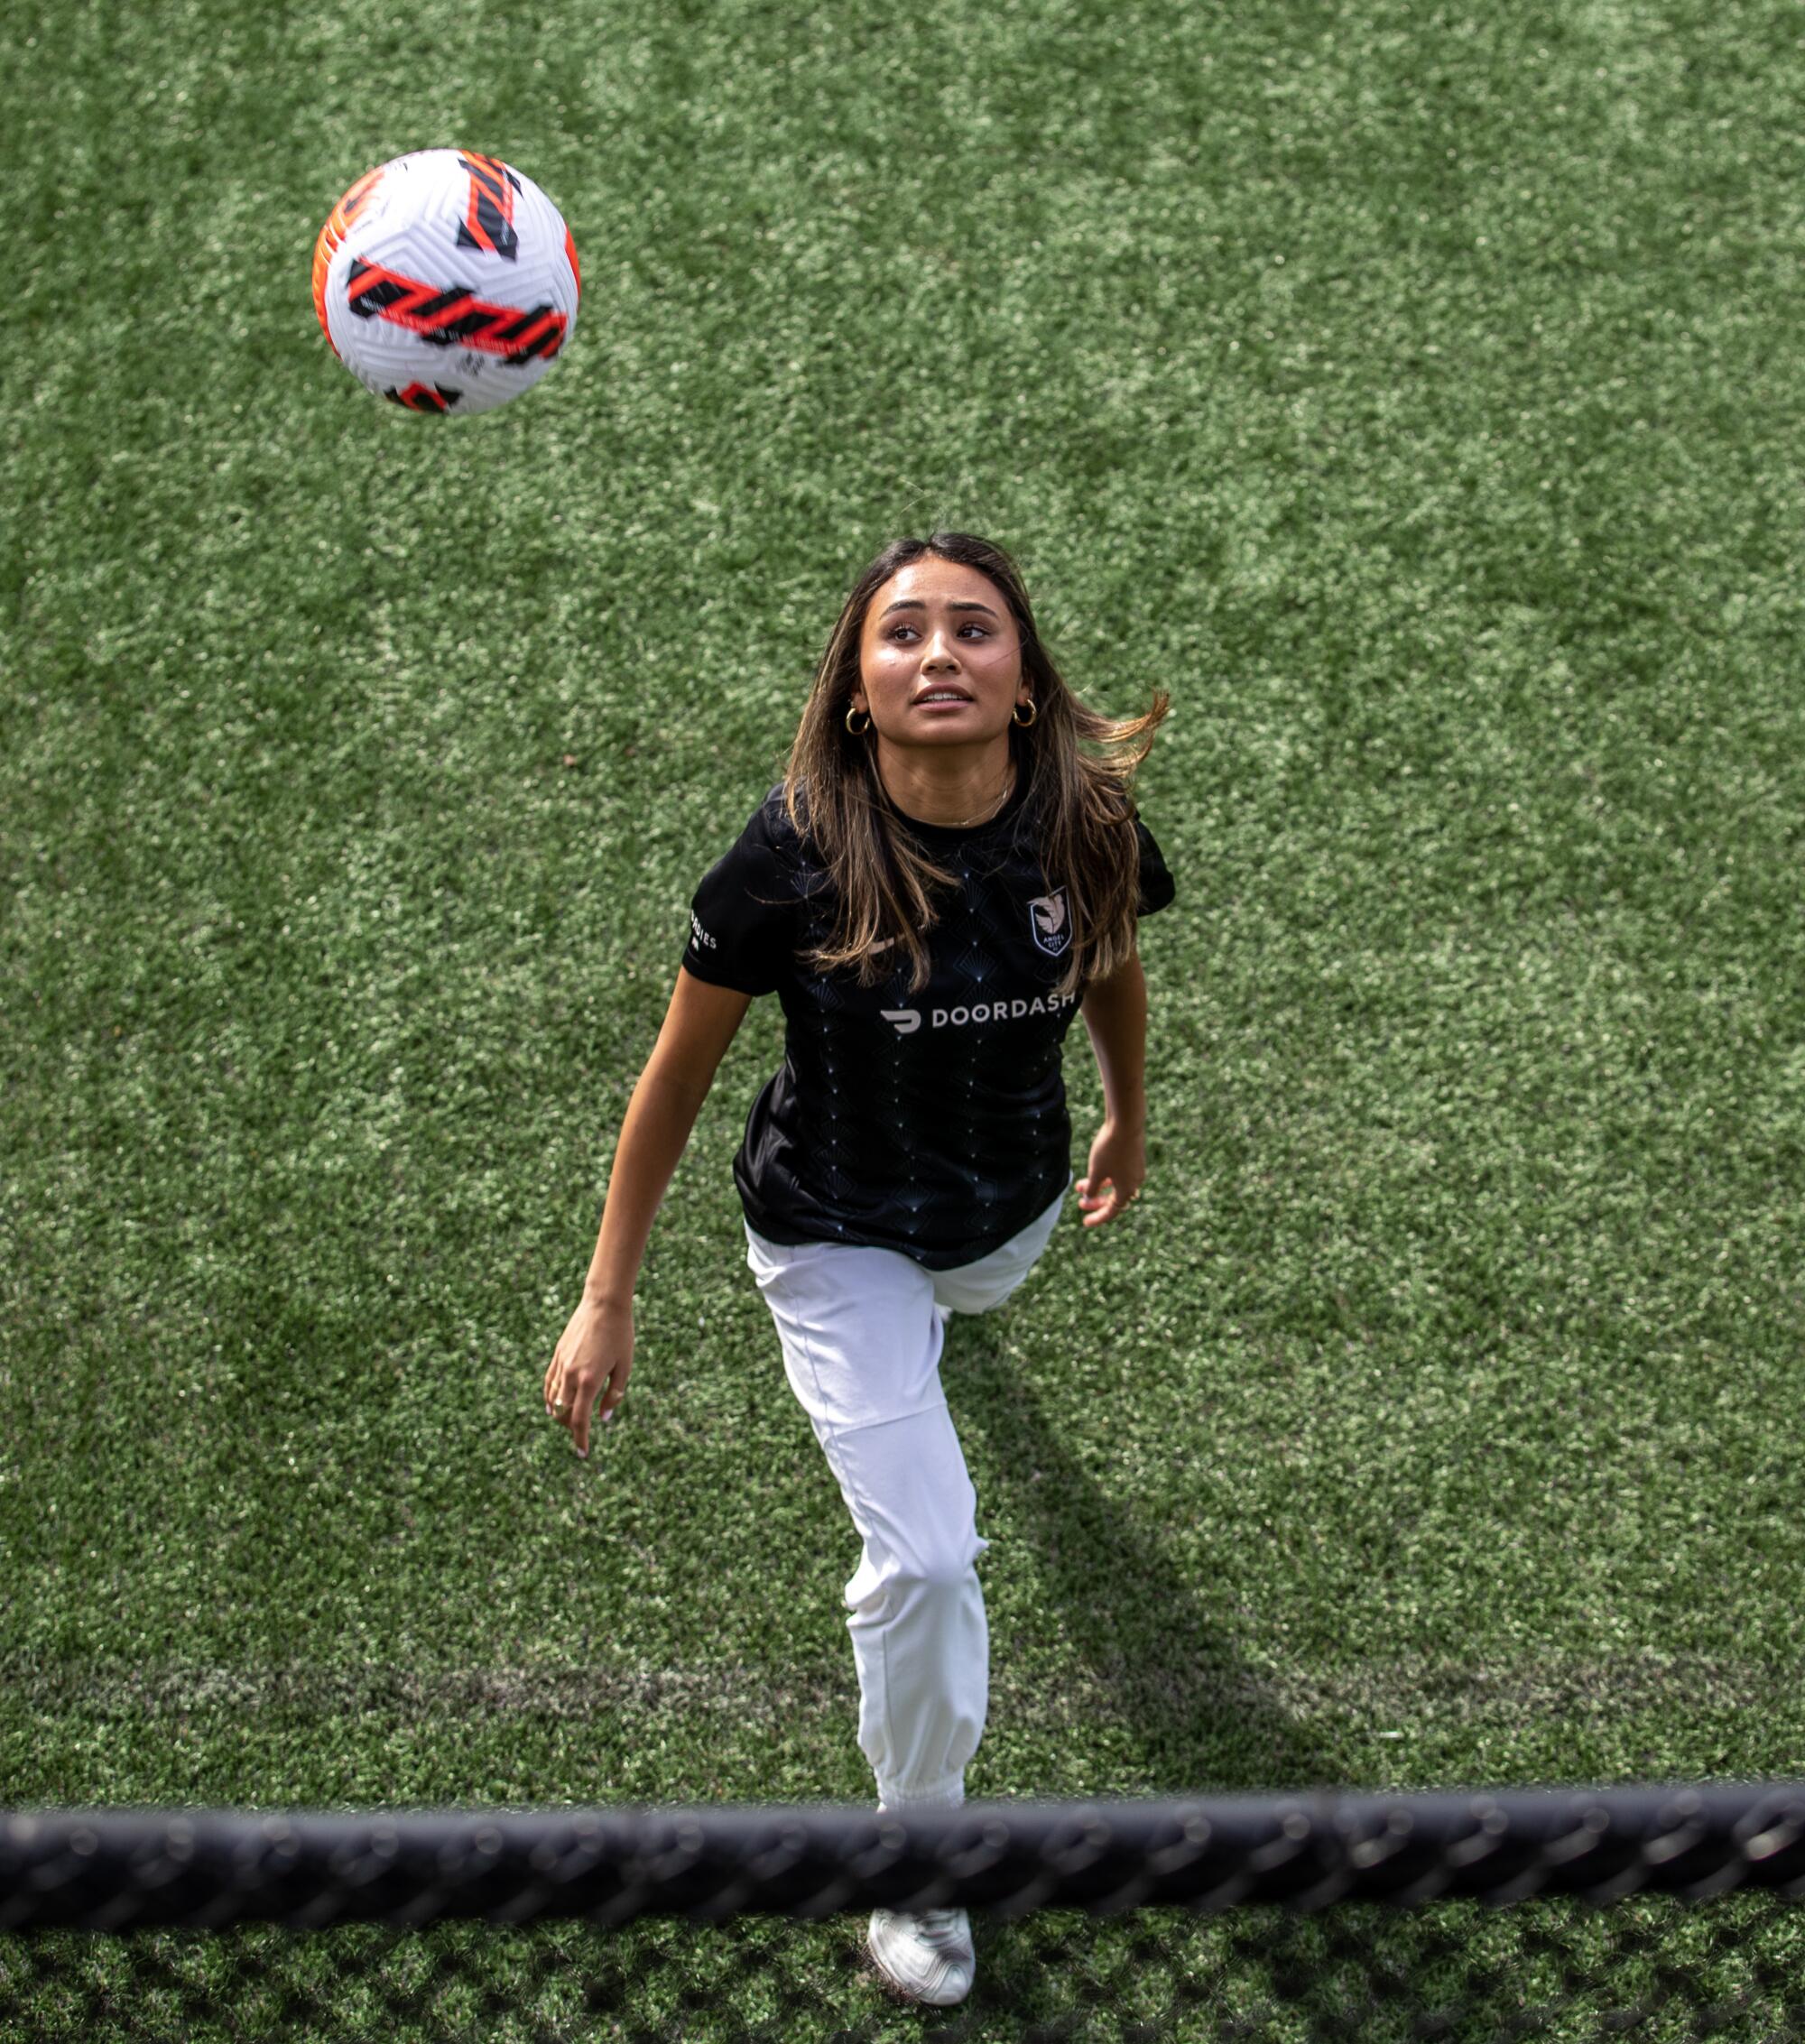 From youth football to World Cup: US teen Alyssa Thompson takes spotlight